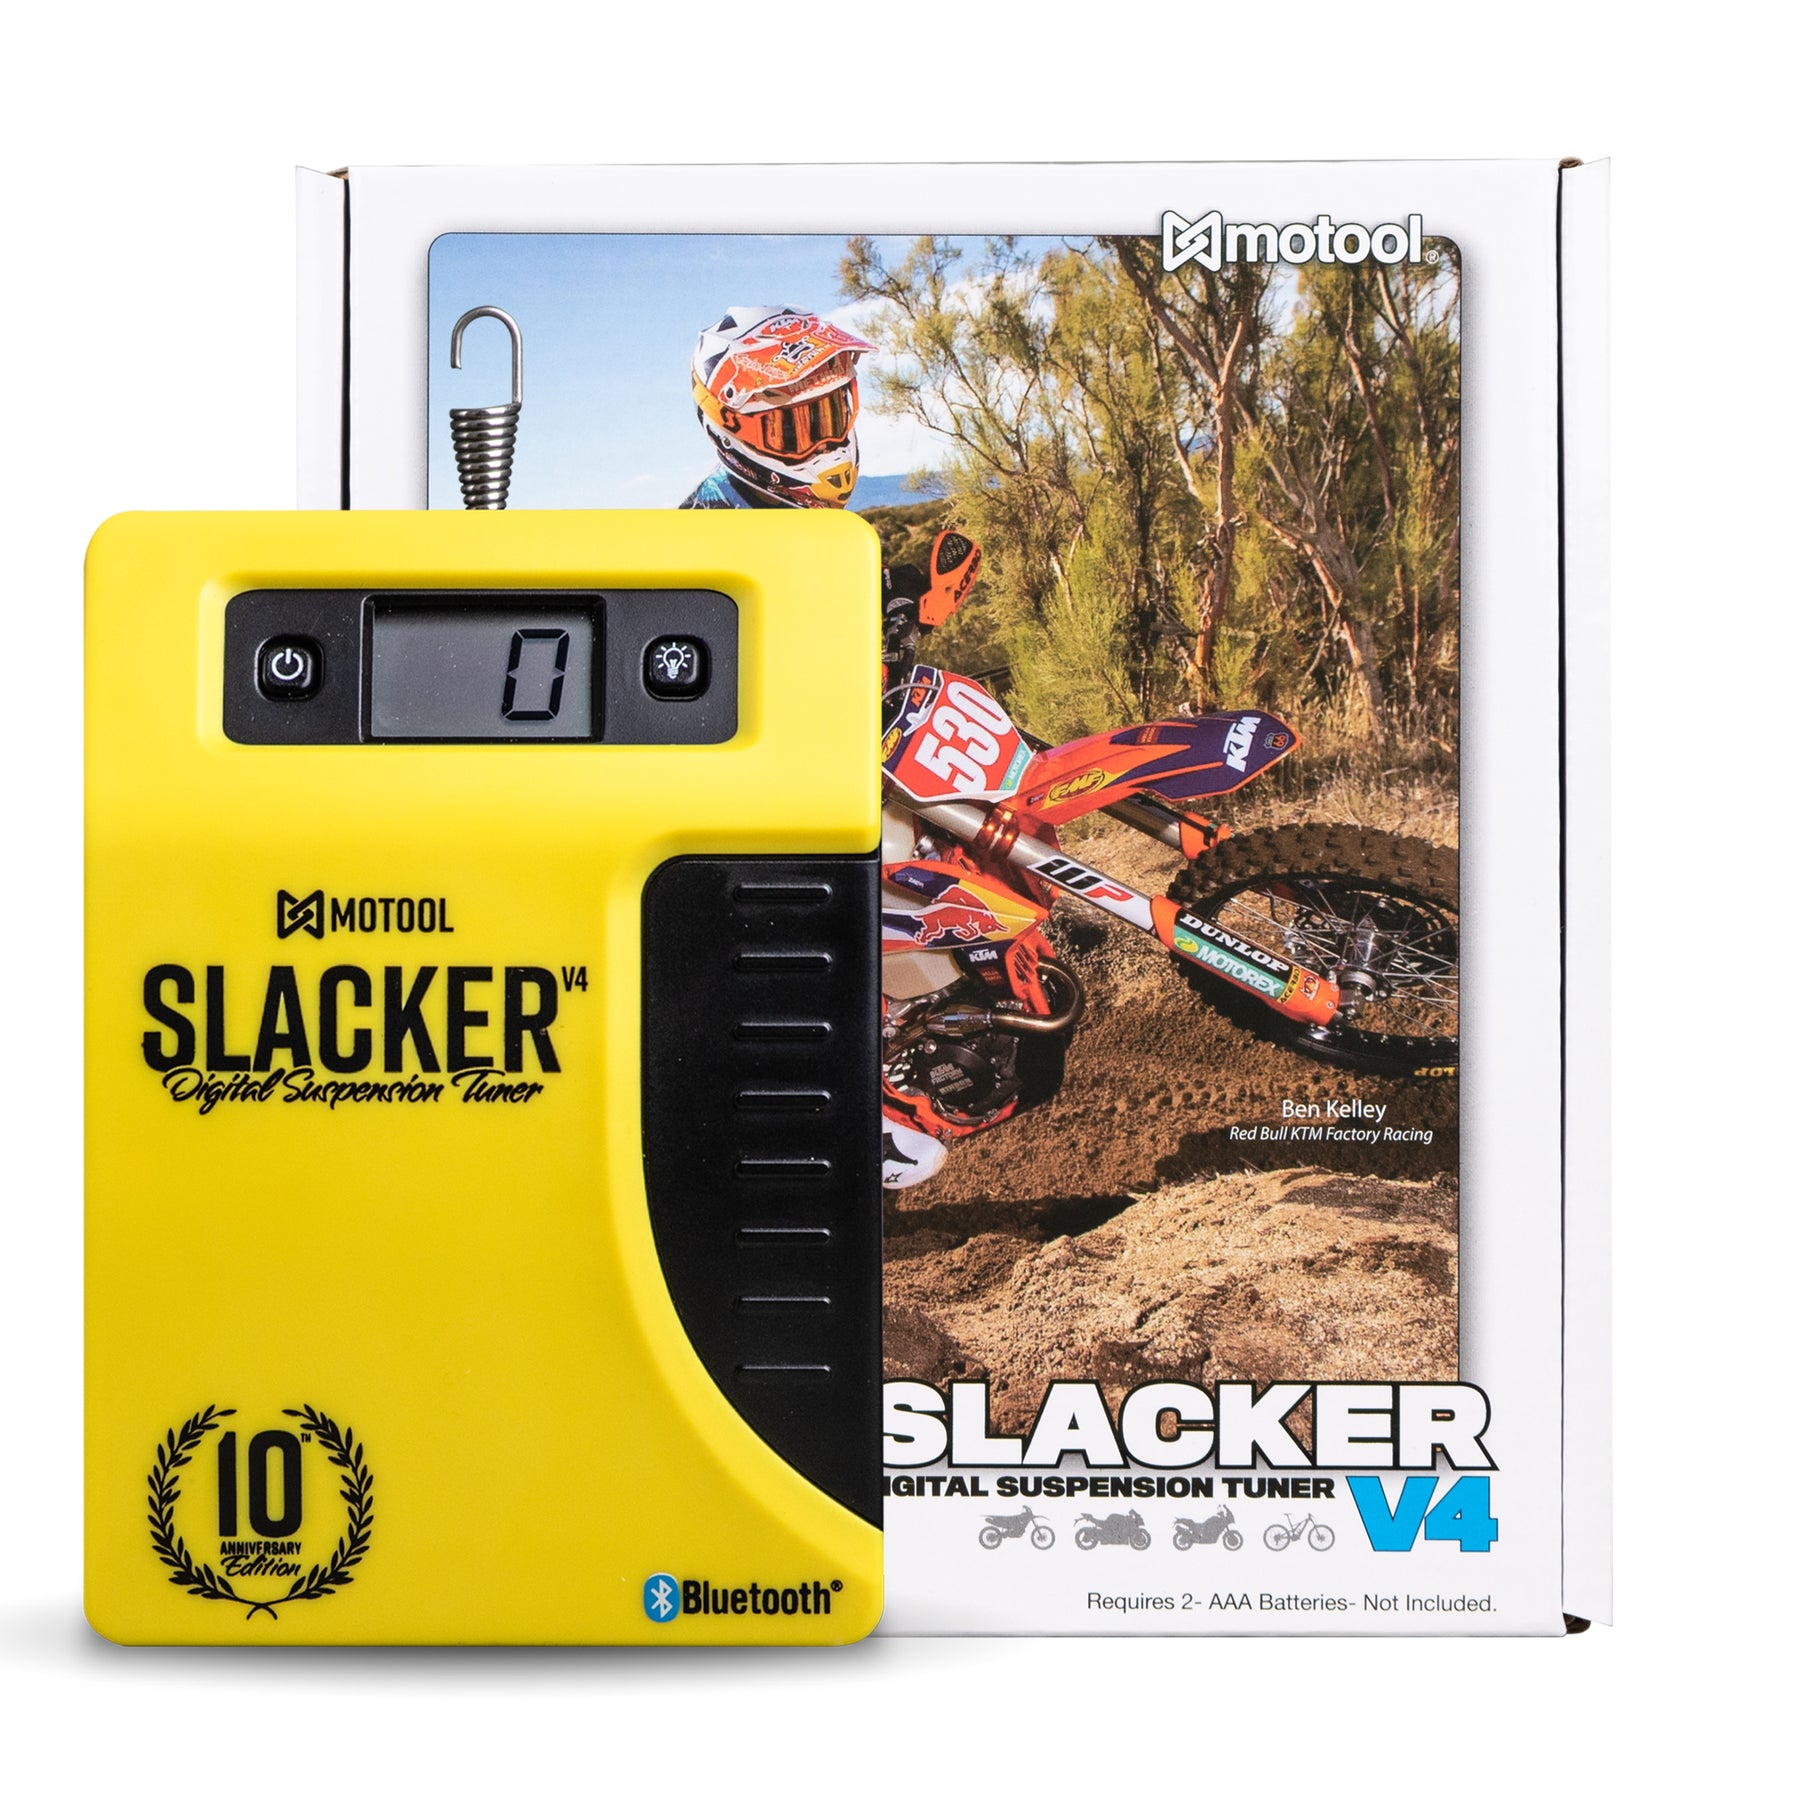 Slacker digital suspension tuner for accurately setting sag on motorcycles and mountain bikes.